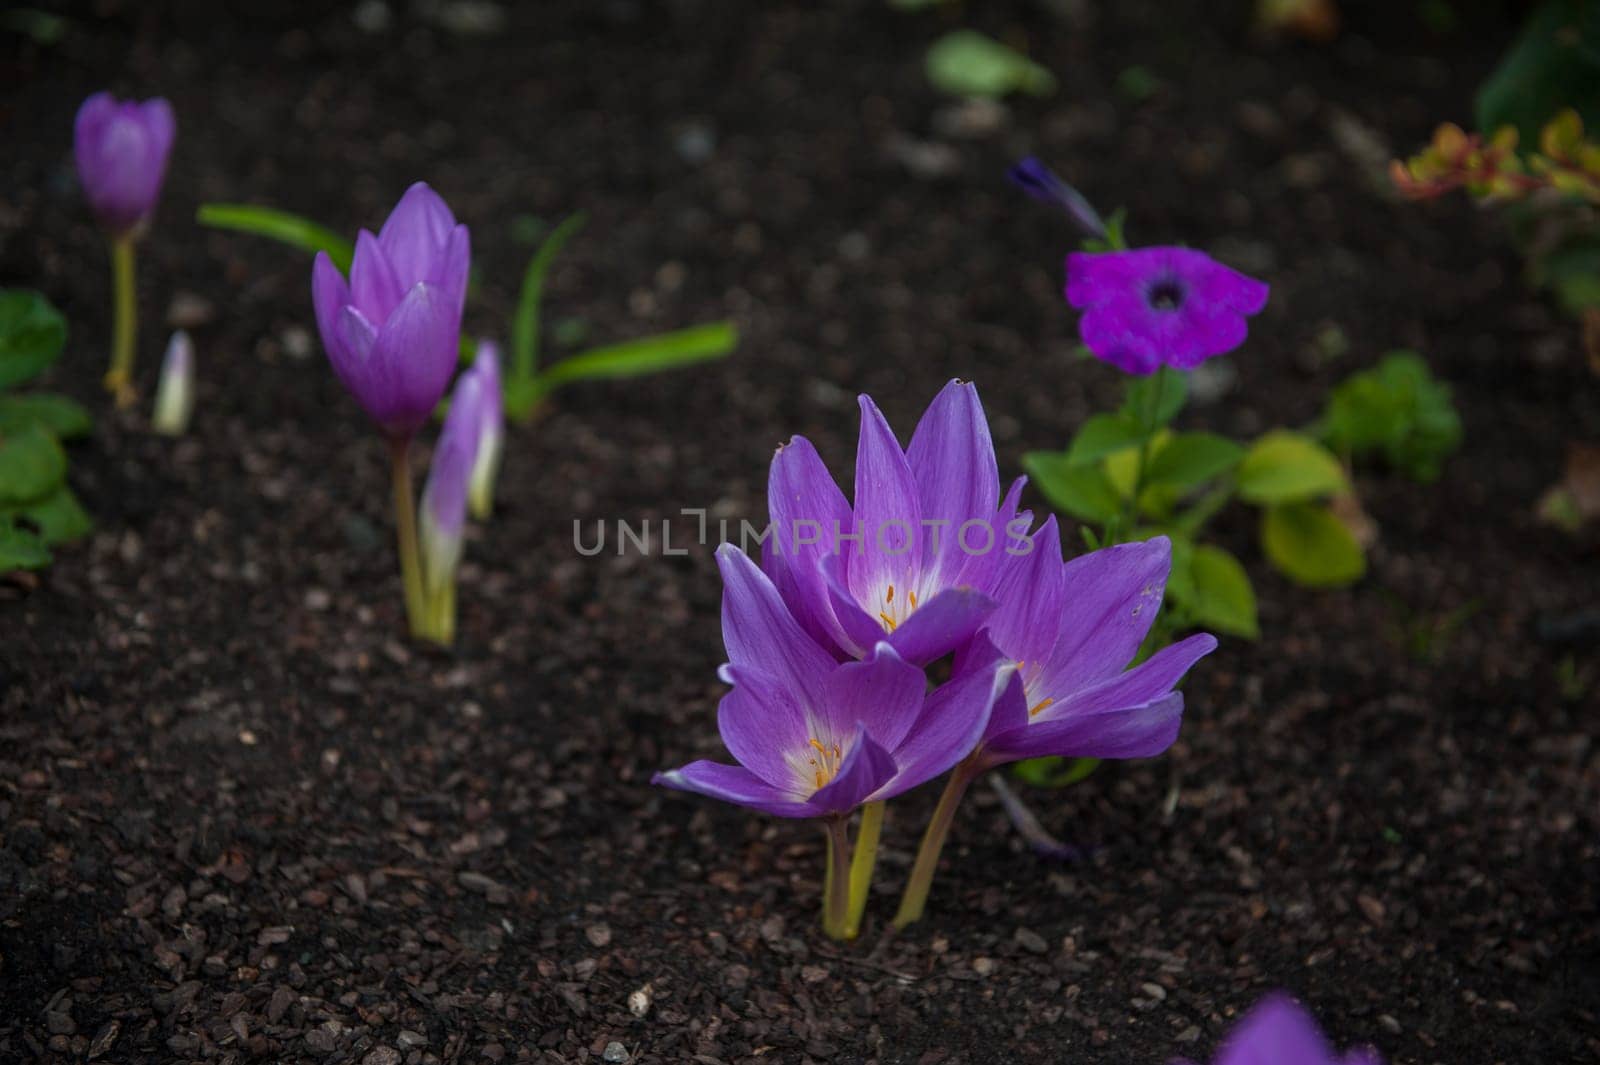 Beautiful blooming purple colchicum autumnale in garden closeup. Tuber-bulbous perennial plant used for medicinal purposes